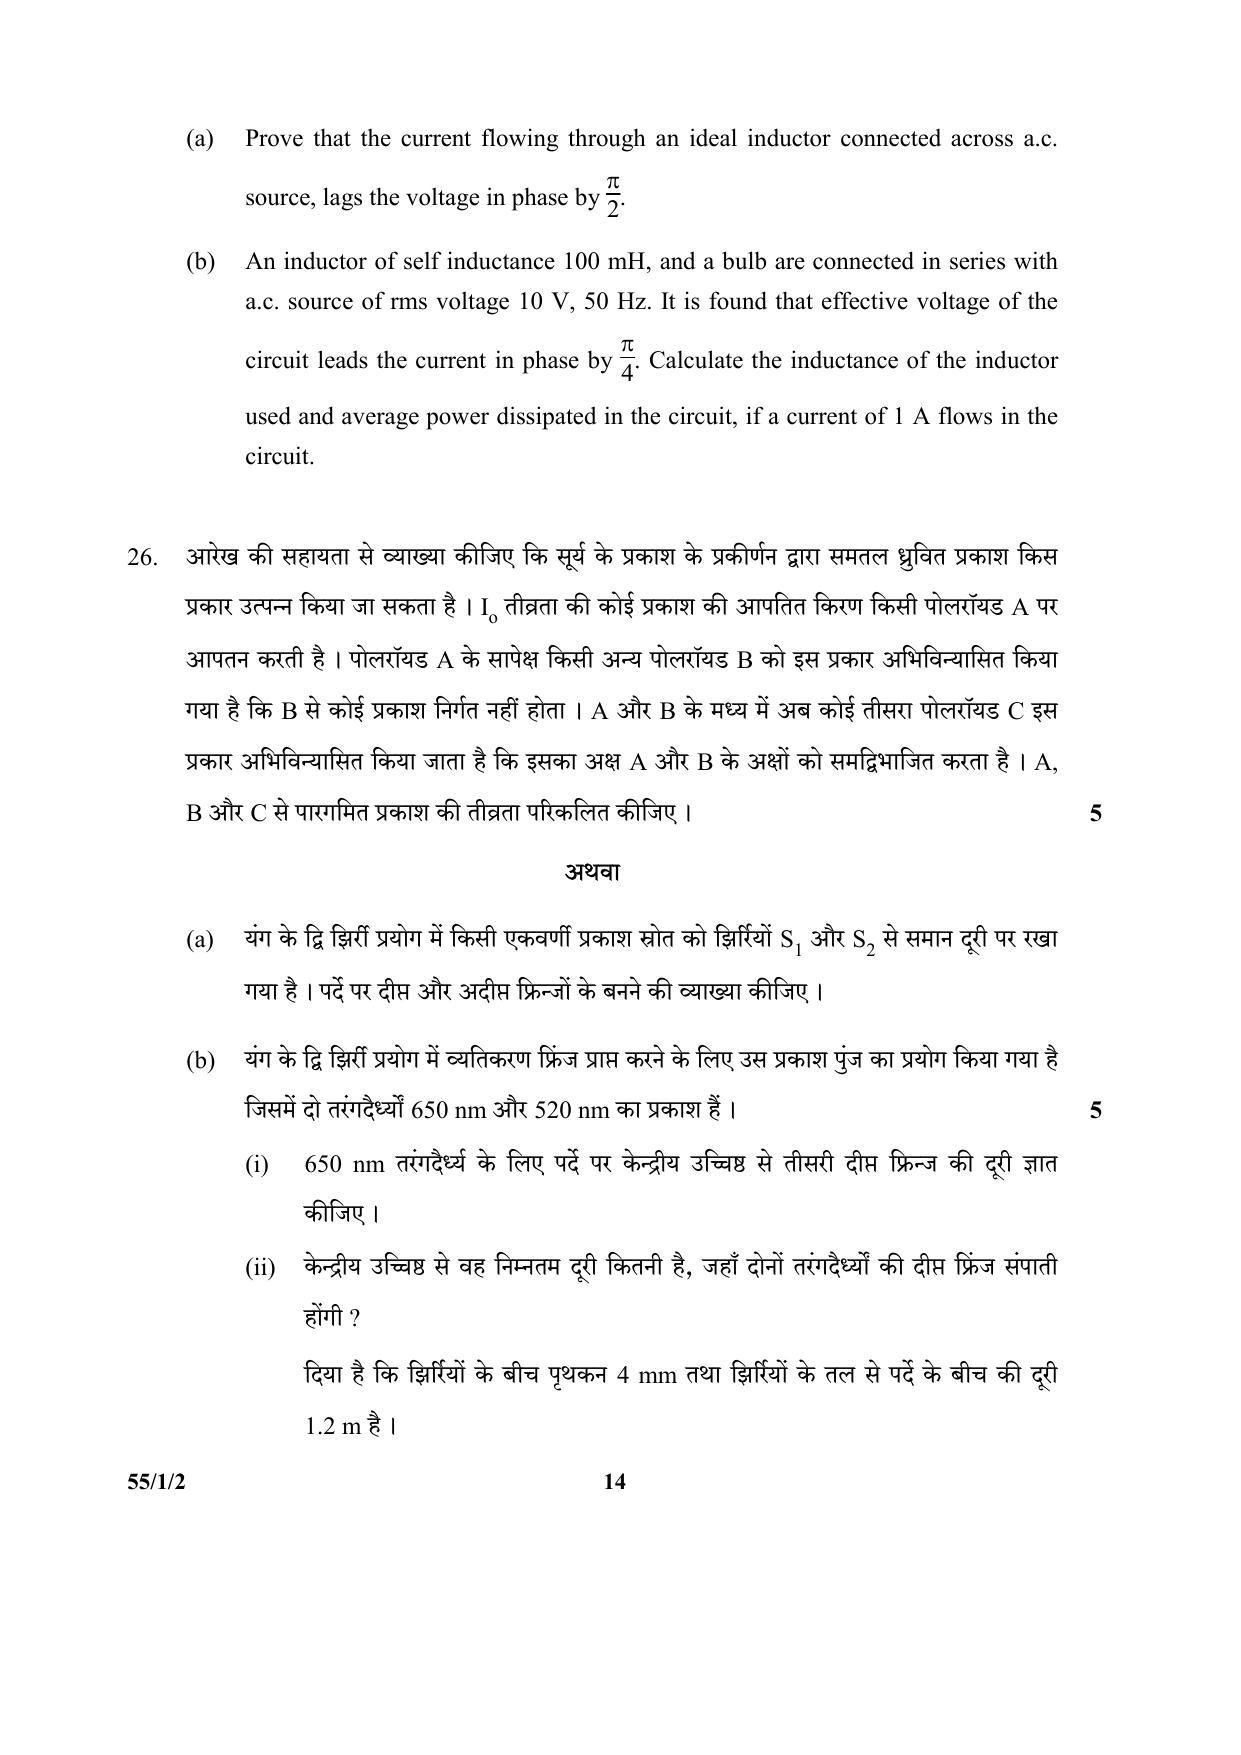 CBSE Class 12 55-1-2 (Physics) 2017-comptt Question Paper - Page 14